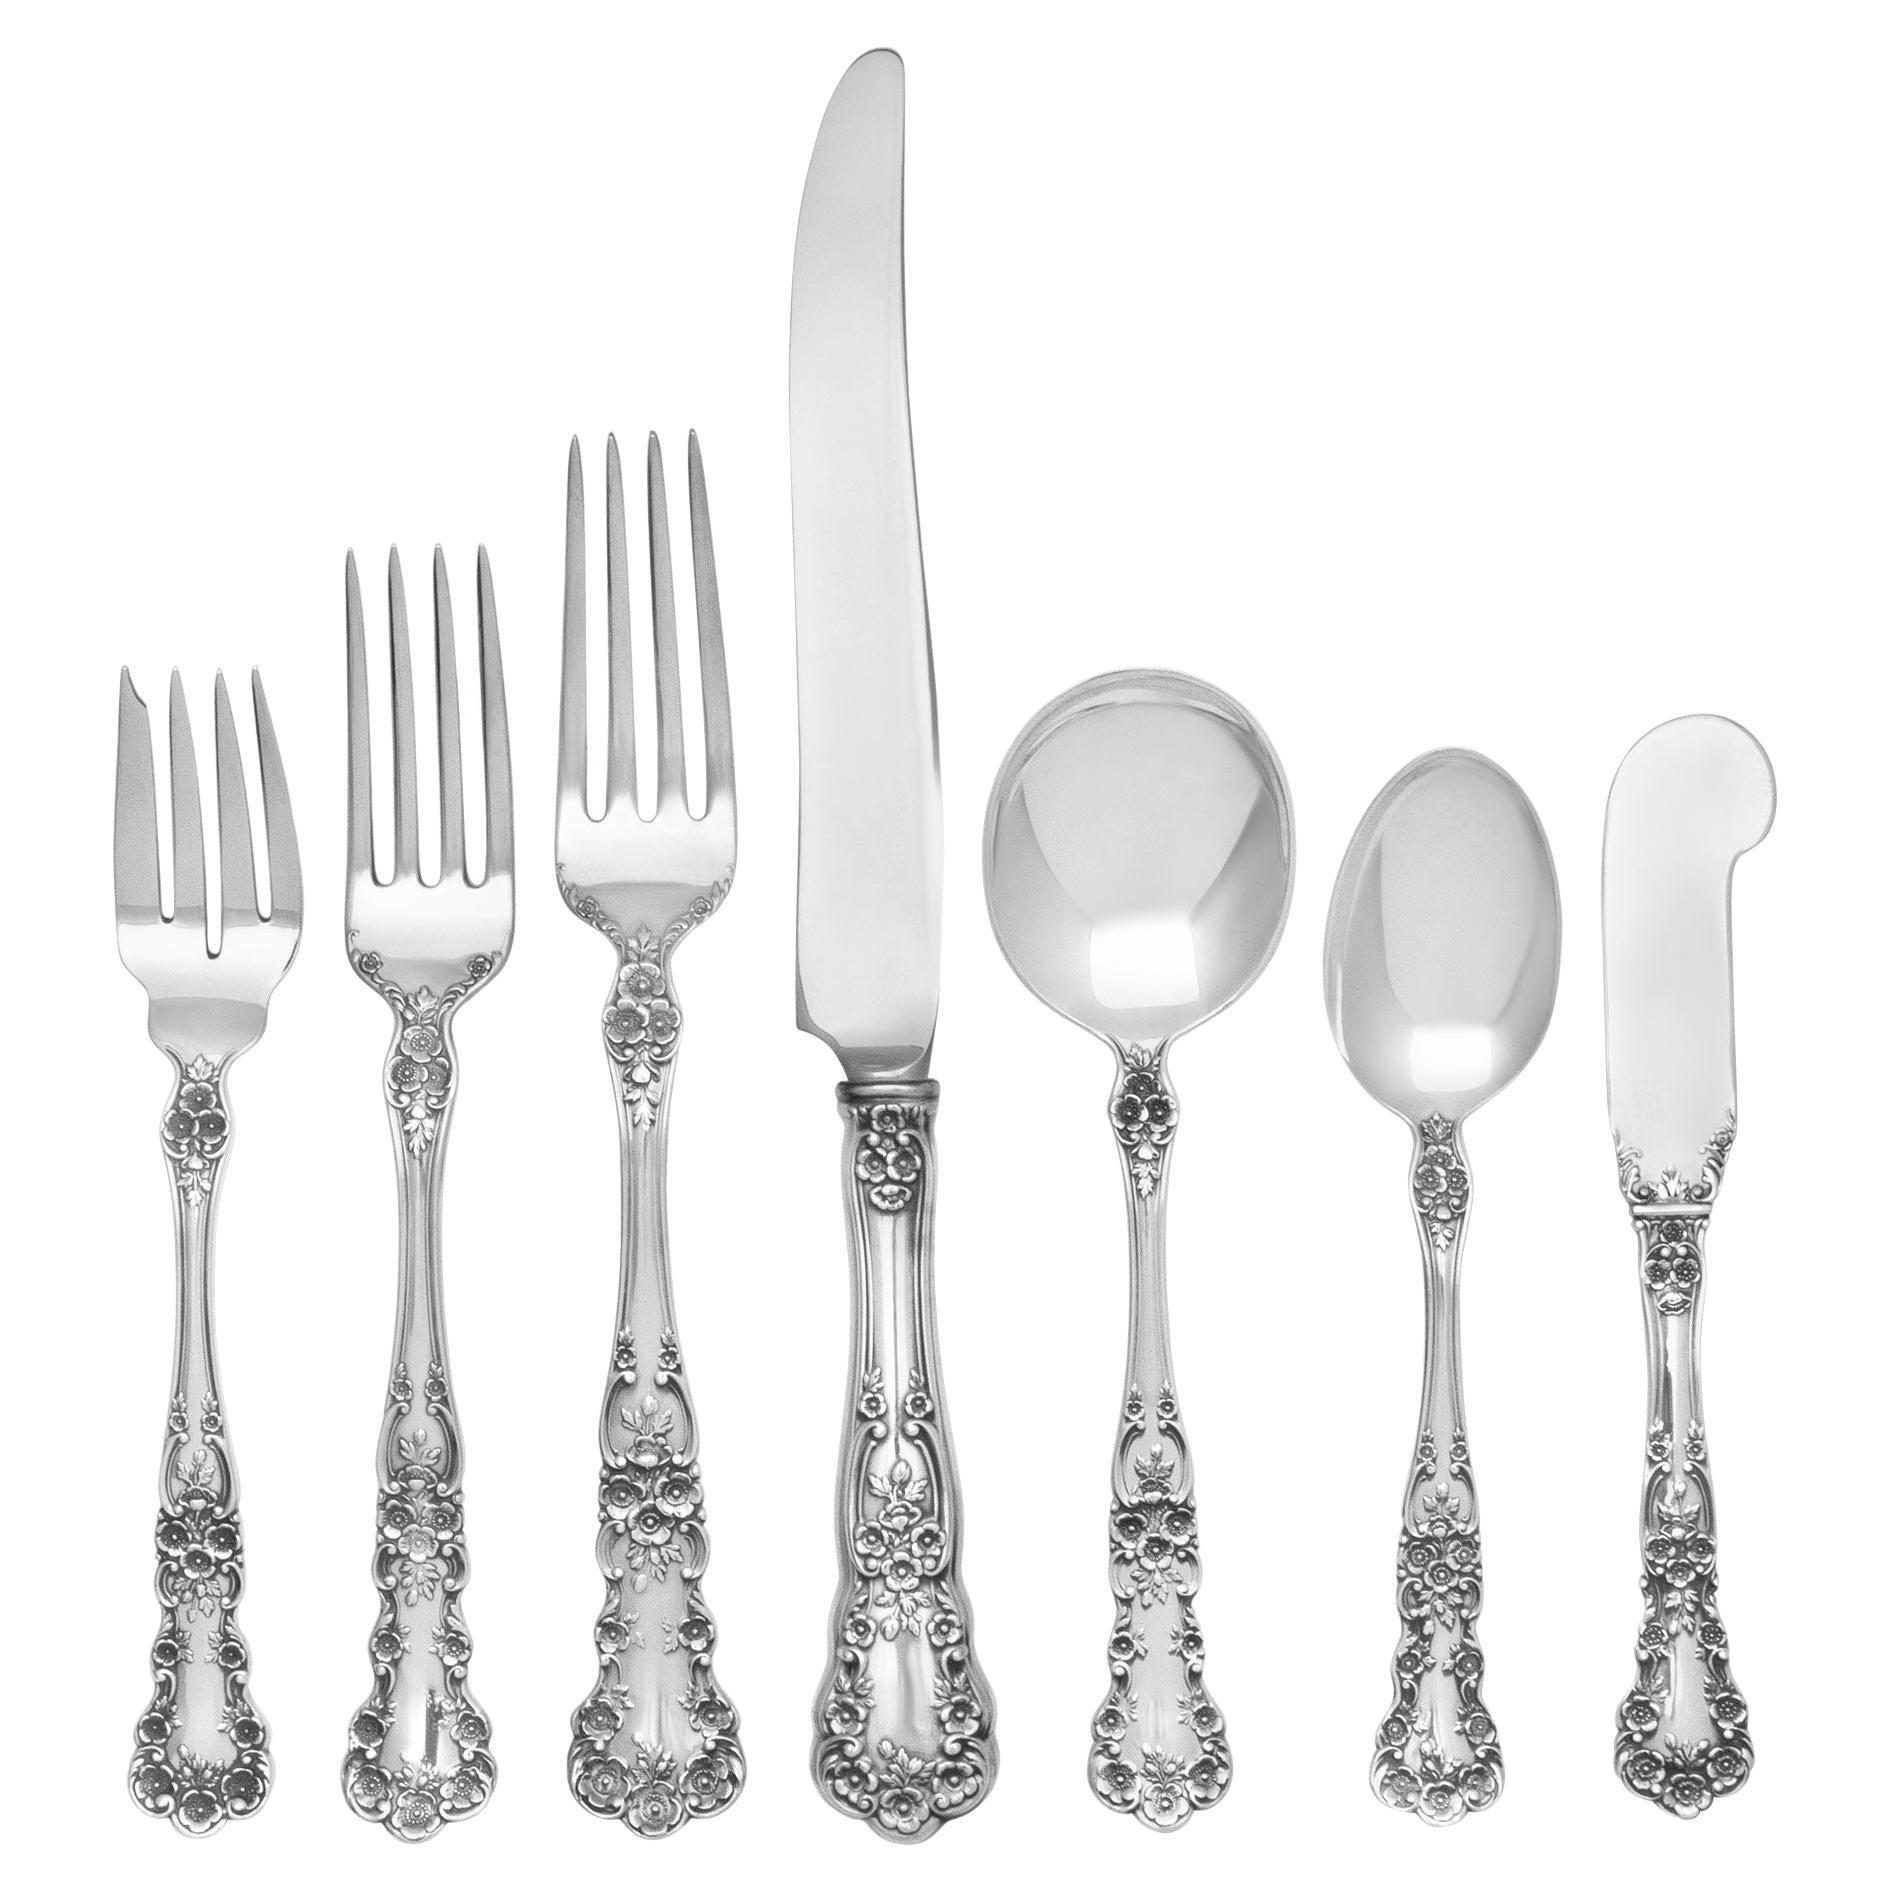 Gorham Medici Sterling Silver 4 Piece Place Setting No Monograms 